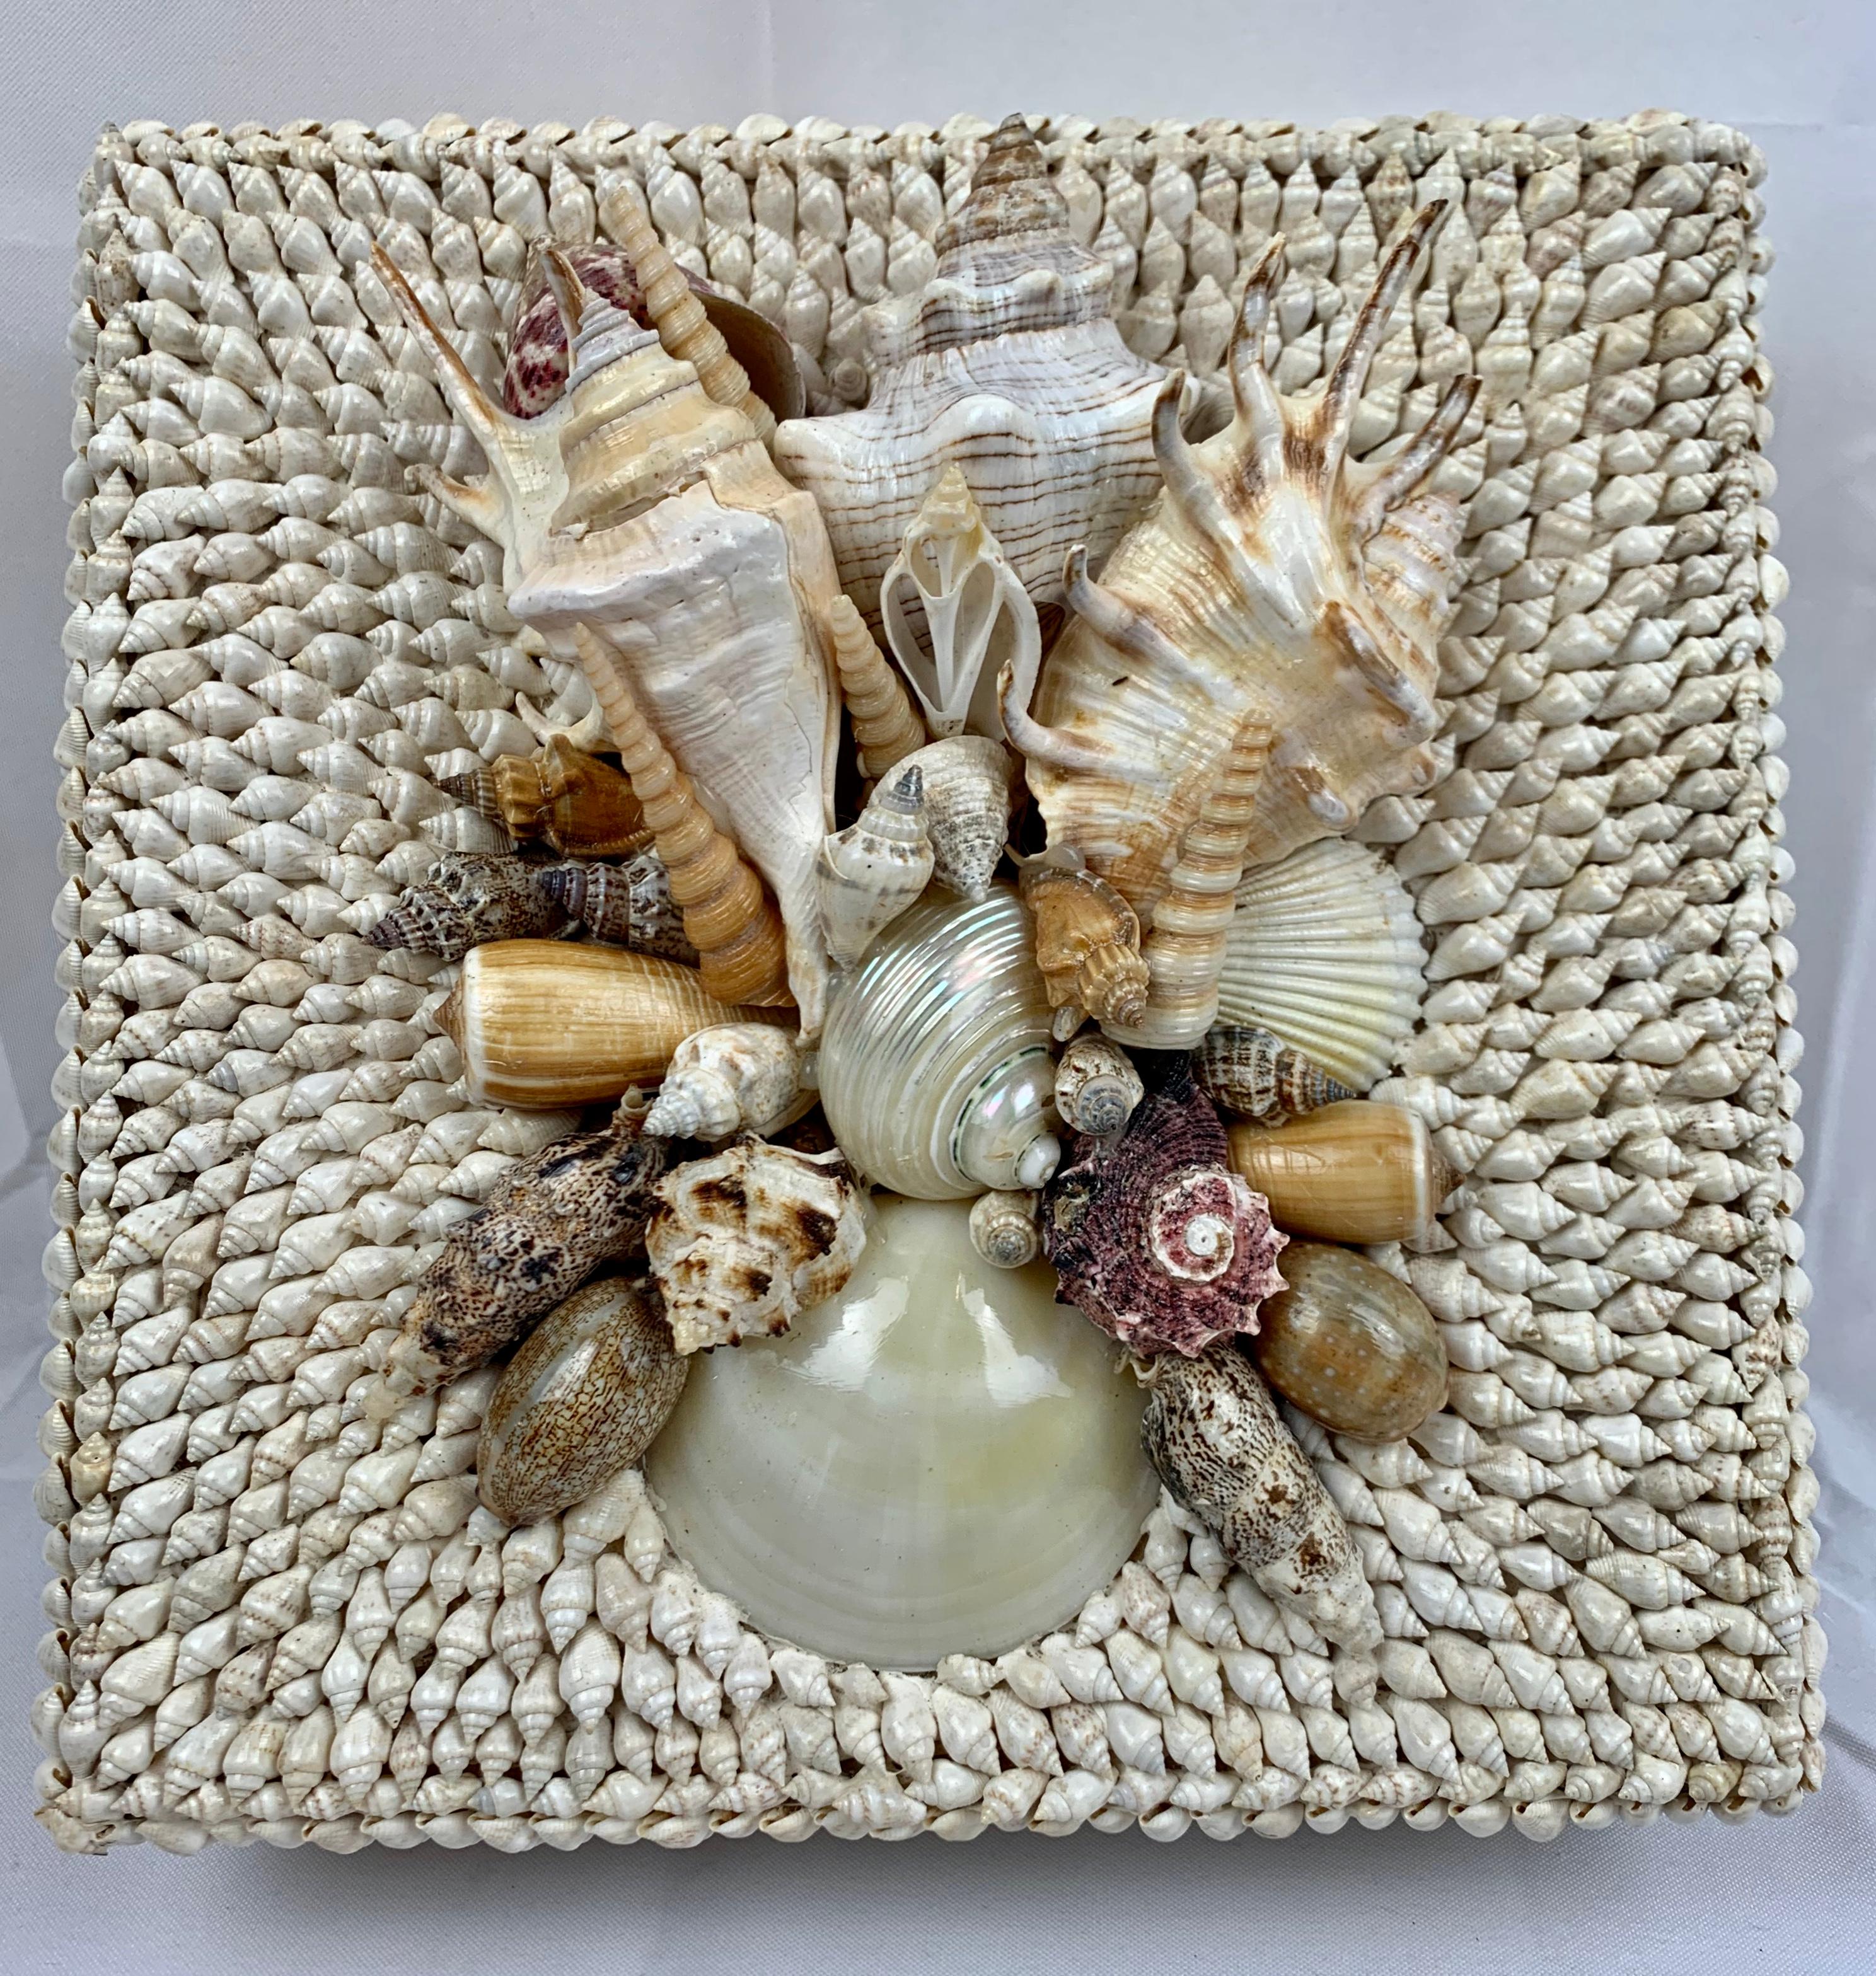 Square box encrusted with natural shells on a bed of petit shells. The lid has an assortment of unusual shells placed on the lids center. The box is lined in white and the lid is removable.
Measures: 10